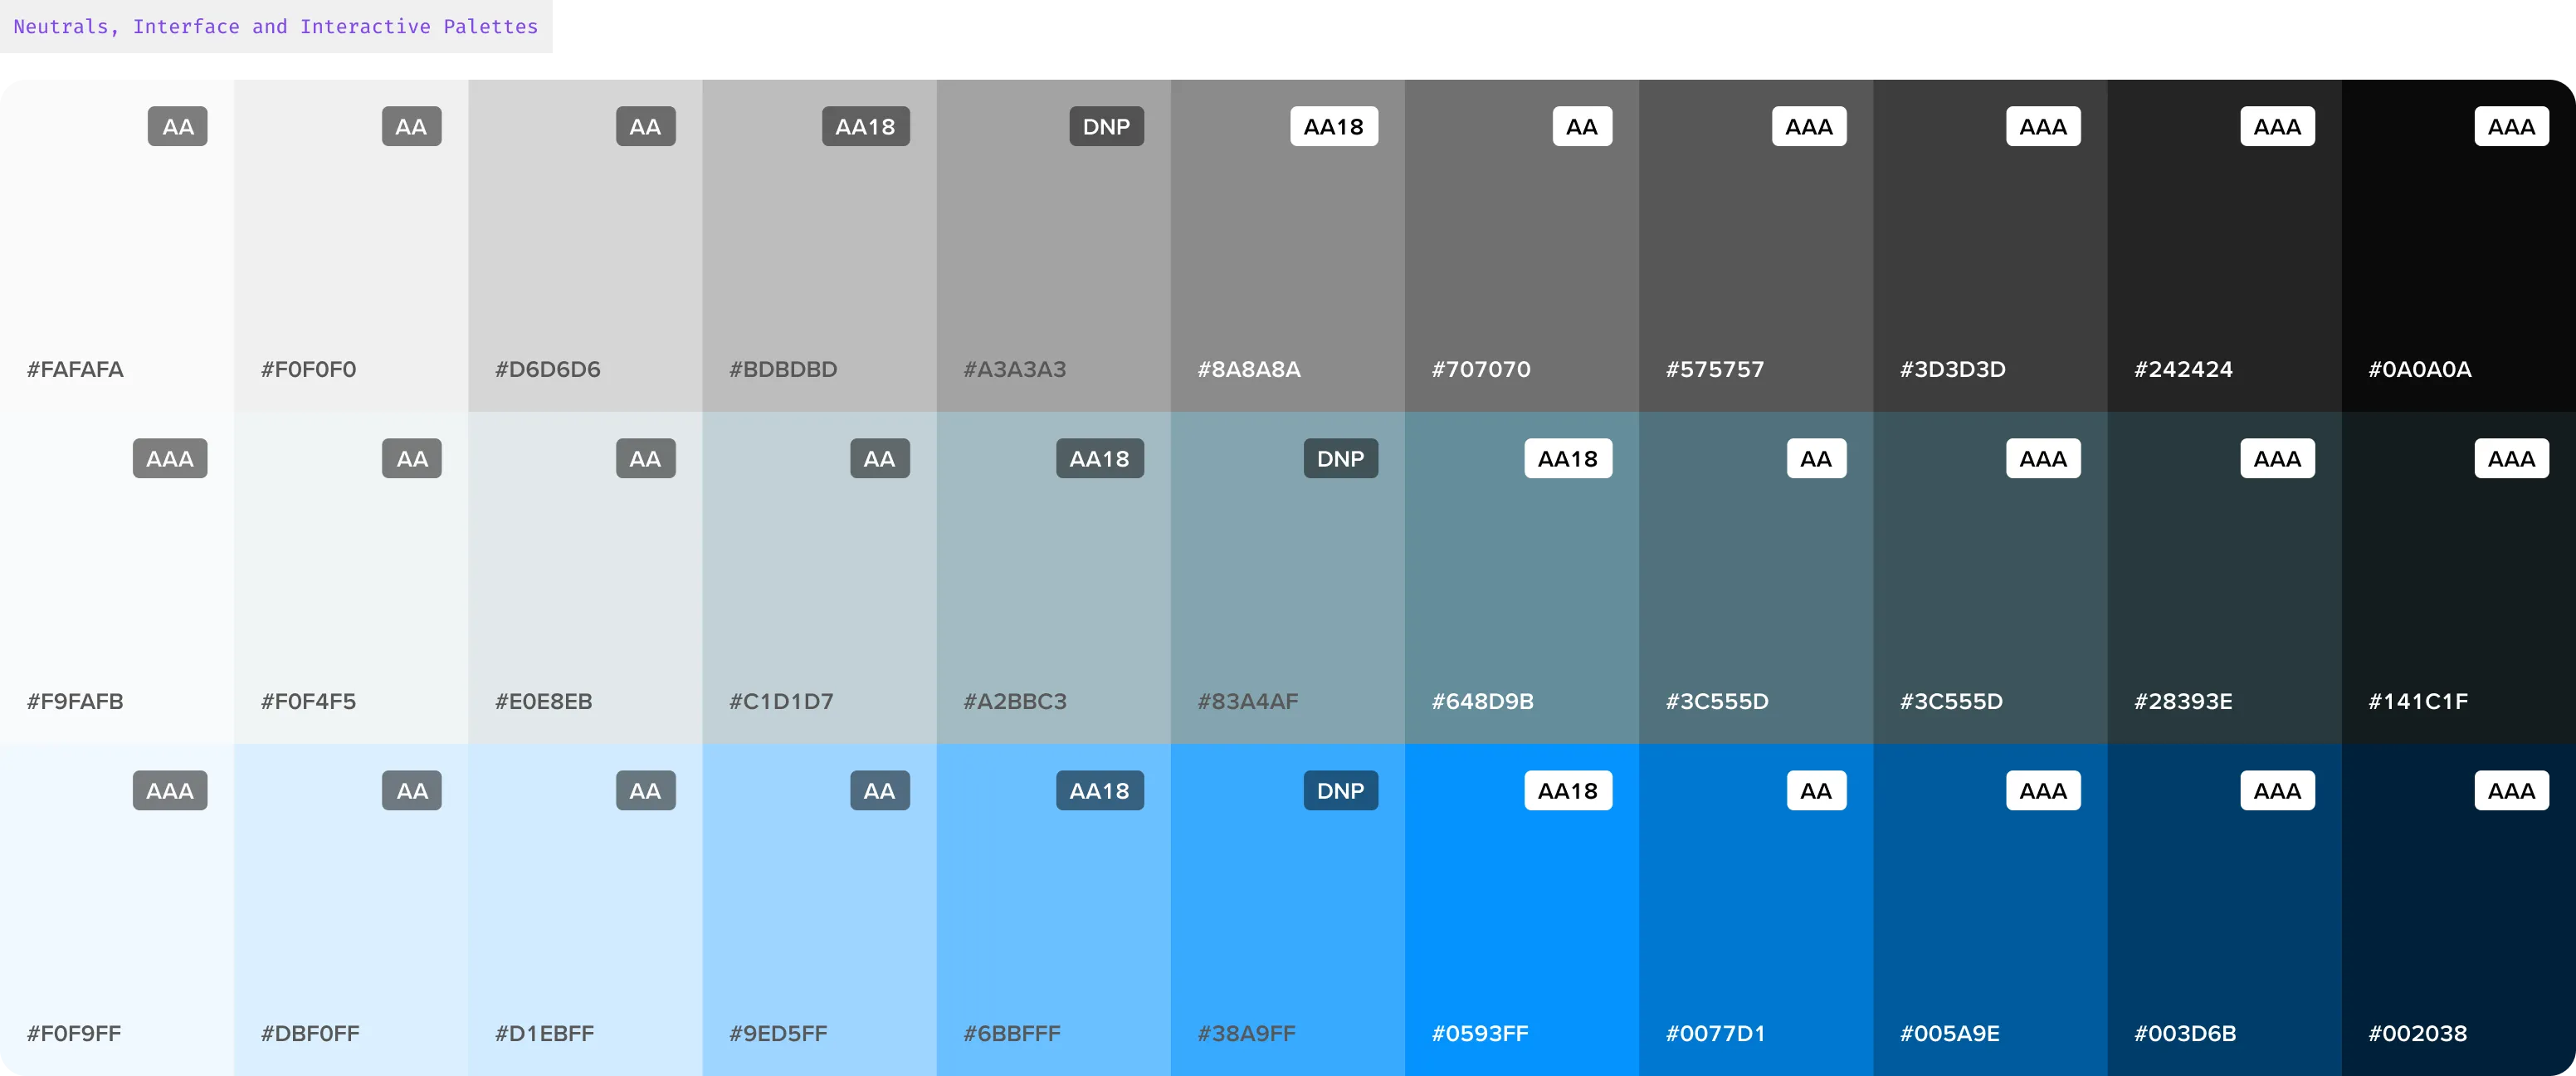 Neutral, inteface, and Interactive Color Palettes